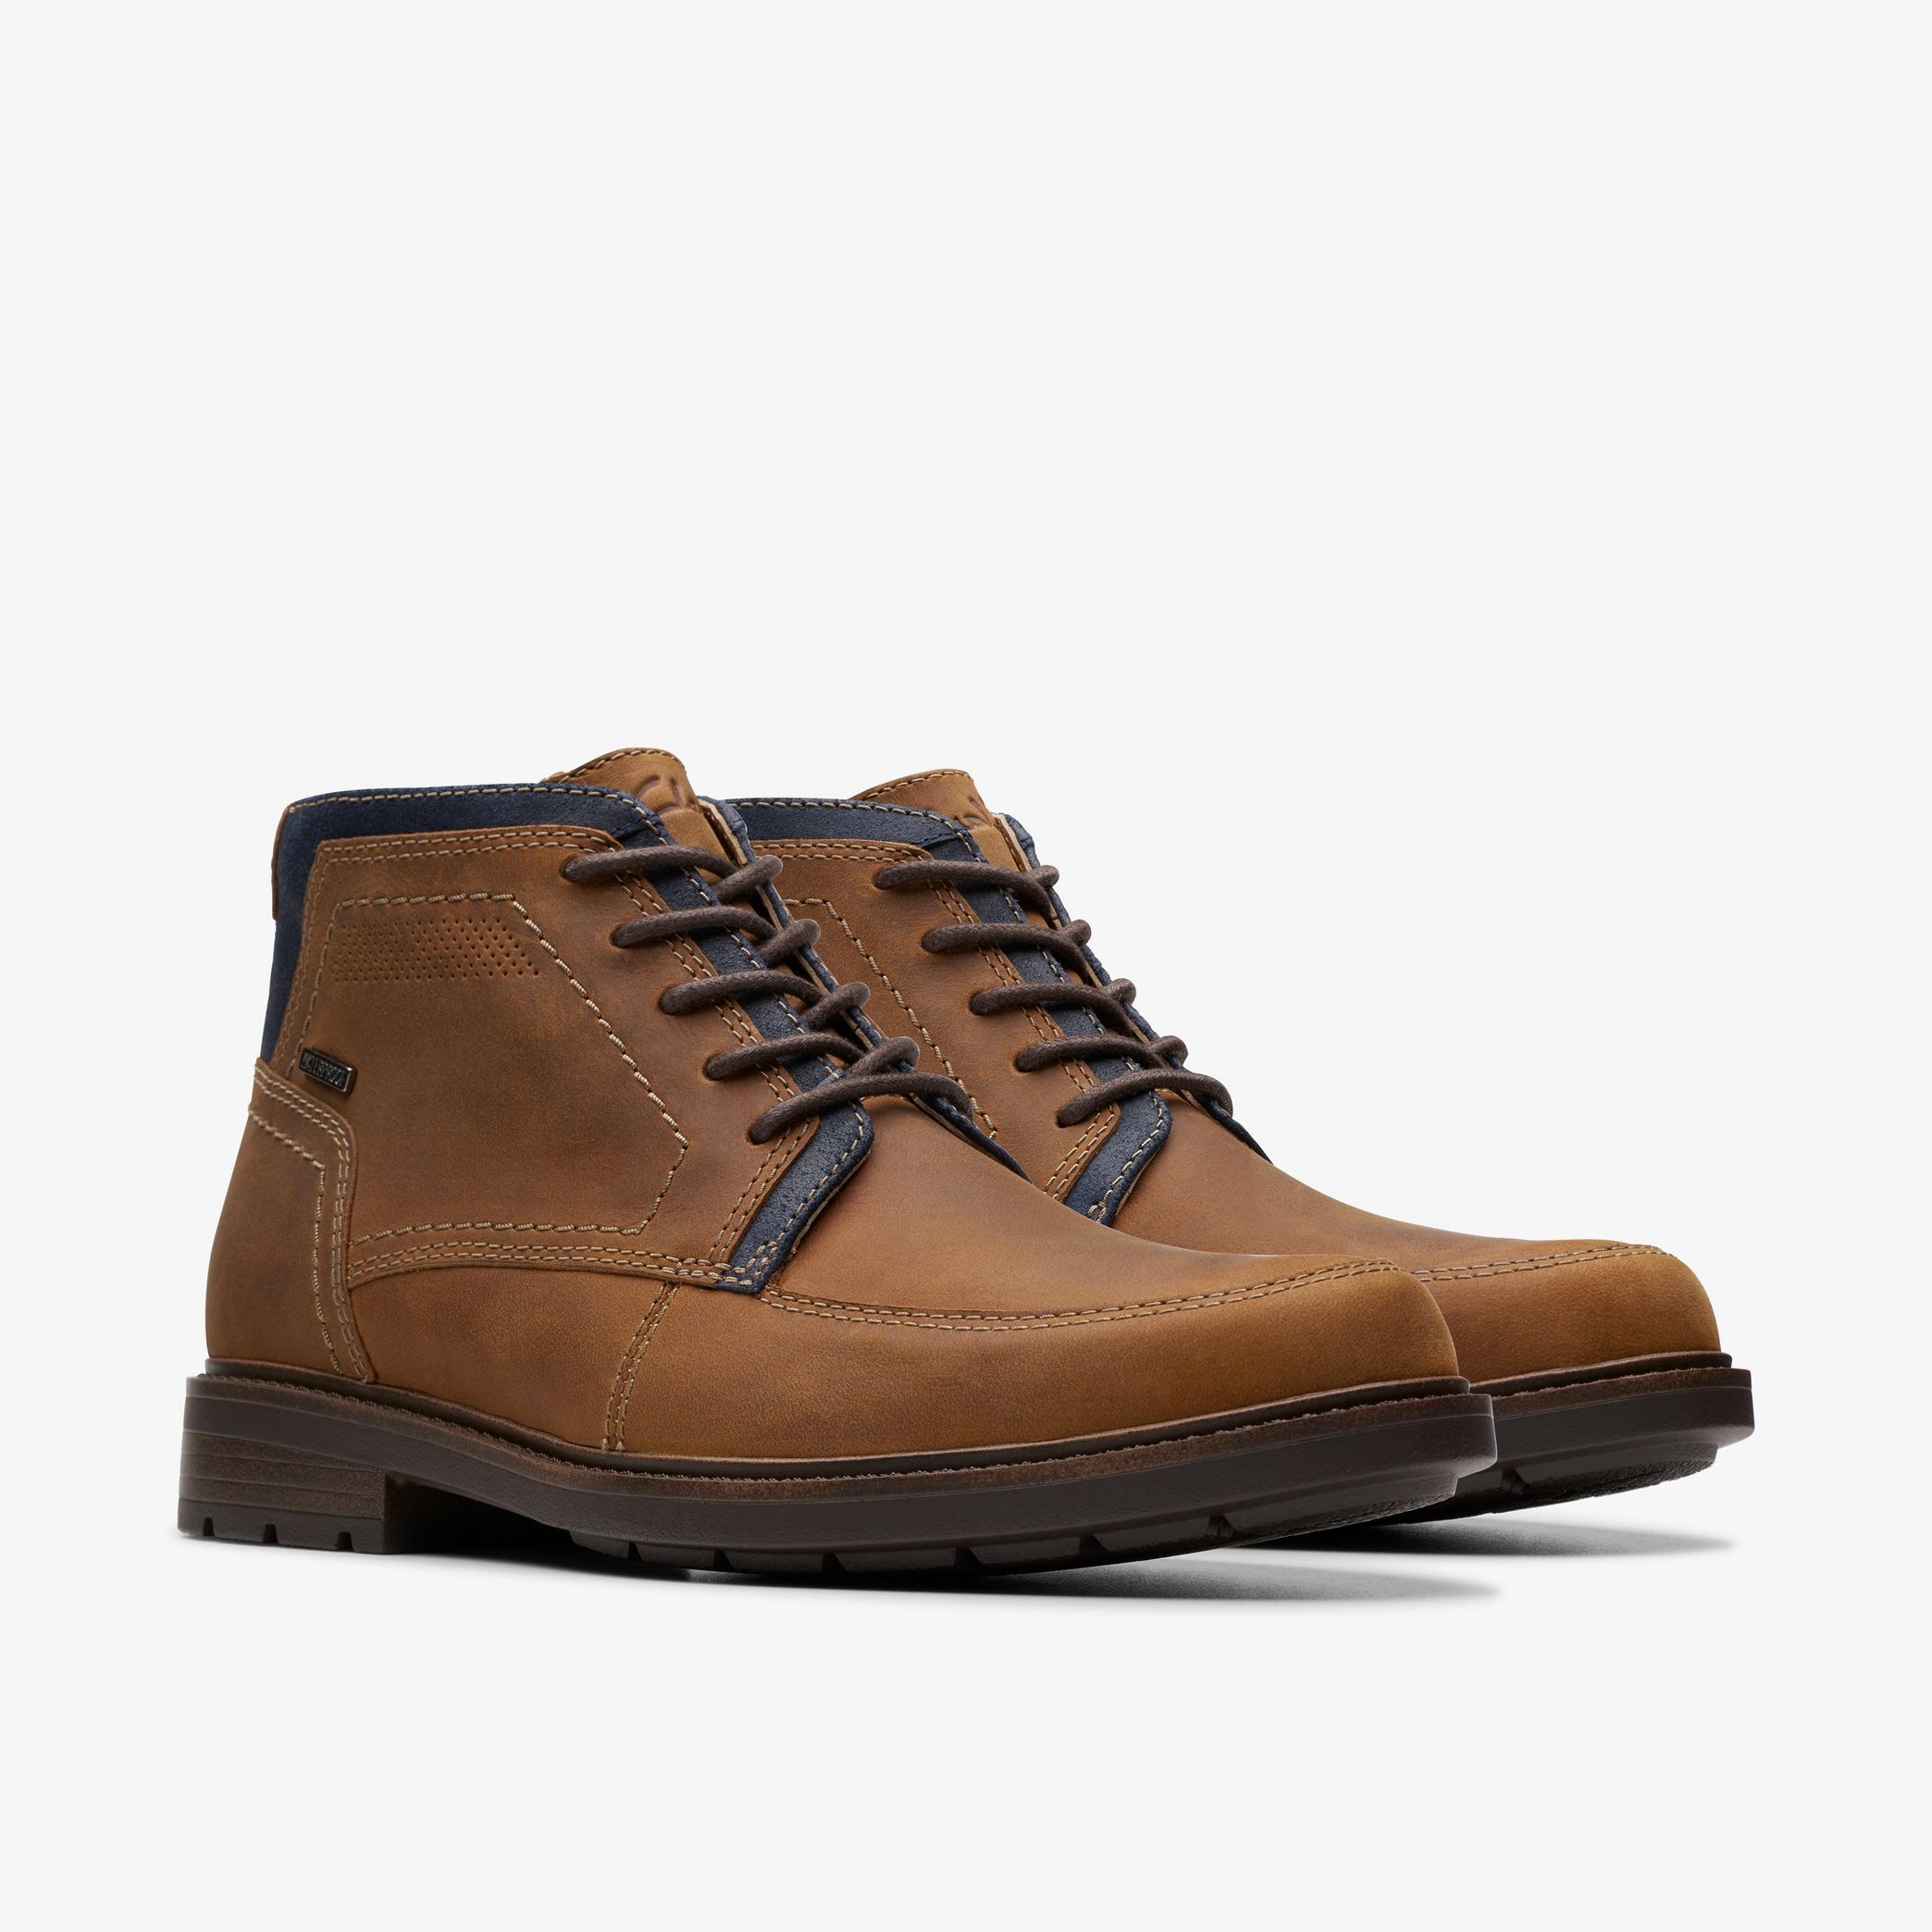 Un Shire Hi Waterproof Tan Leather Boots, view 4 of 6